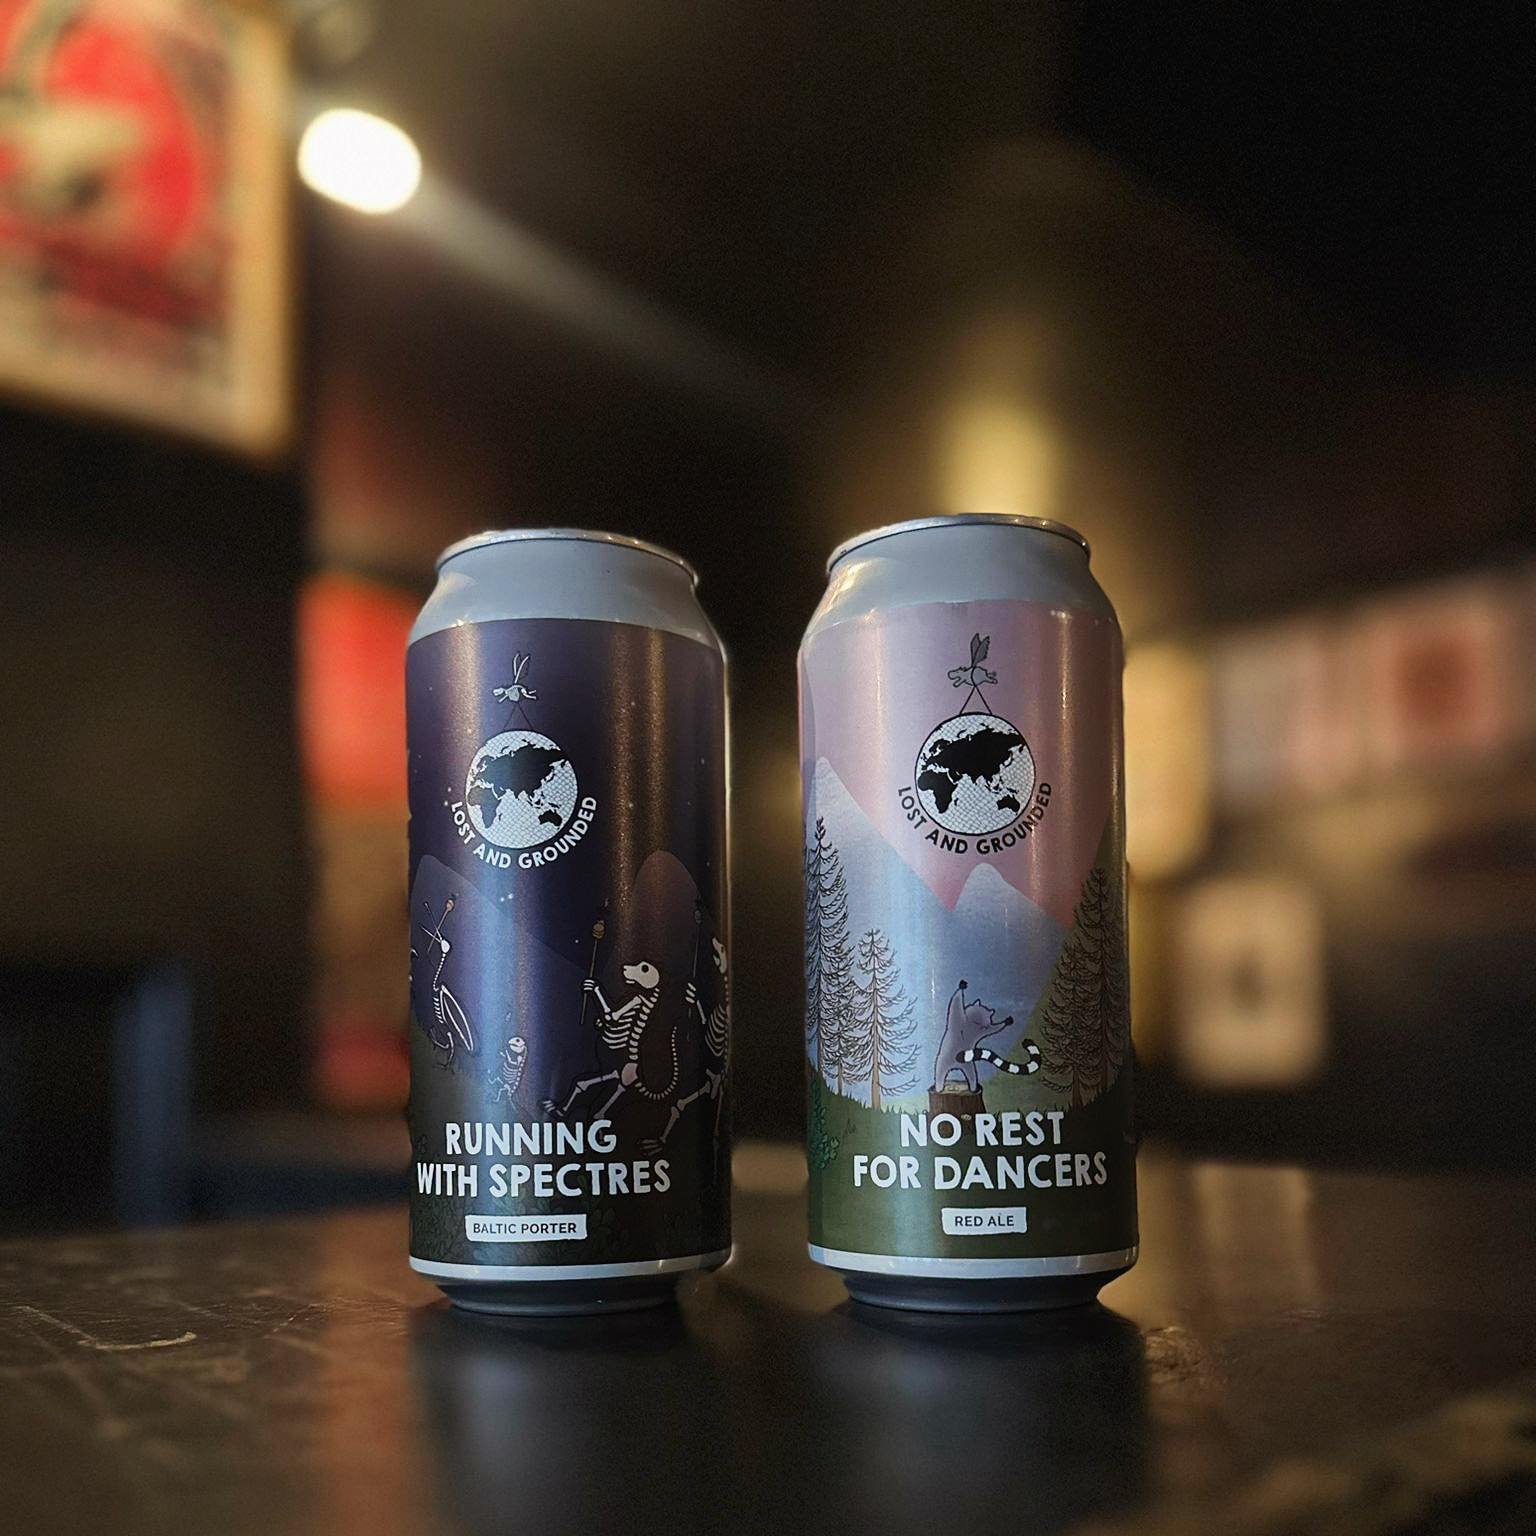 Going to a gig in our venue anytime soon?

We got some fresh beers from our partners in crime @lostandgroundedbrewers in the venue fridge ready for you to devour ! Come get at &lsquo;em !

Check our full show listings at ourblackheart.com